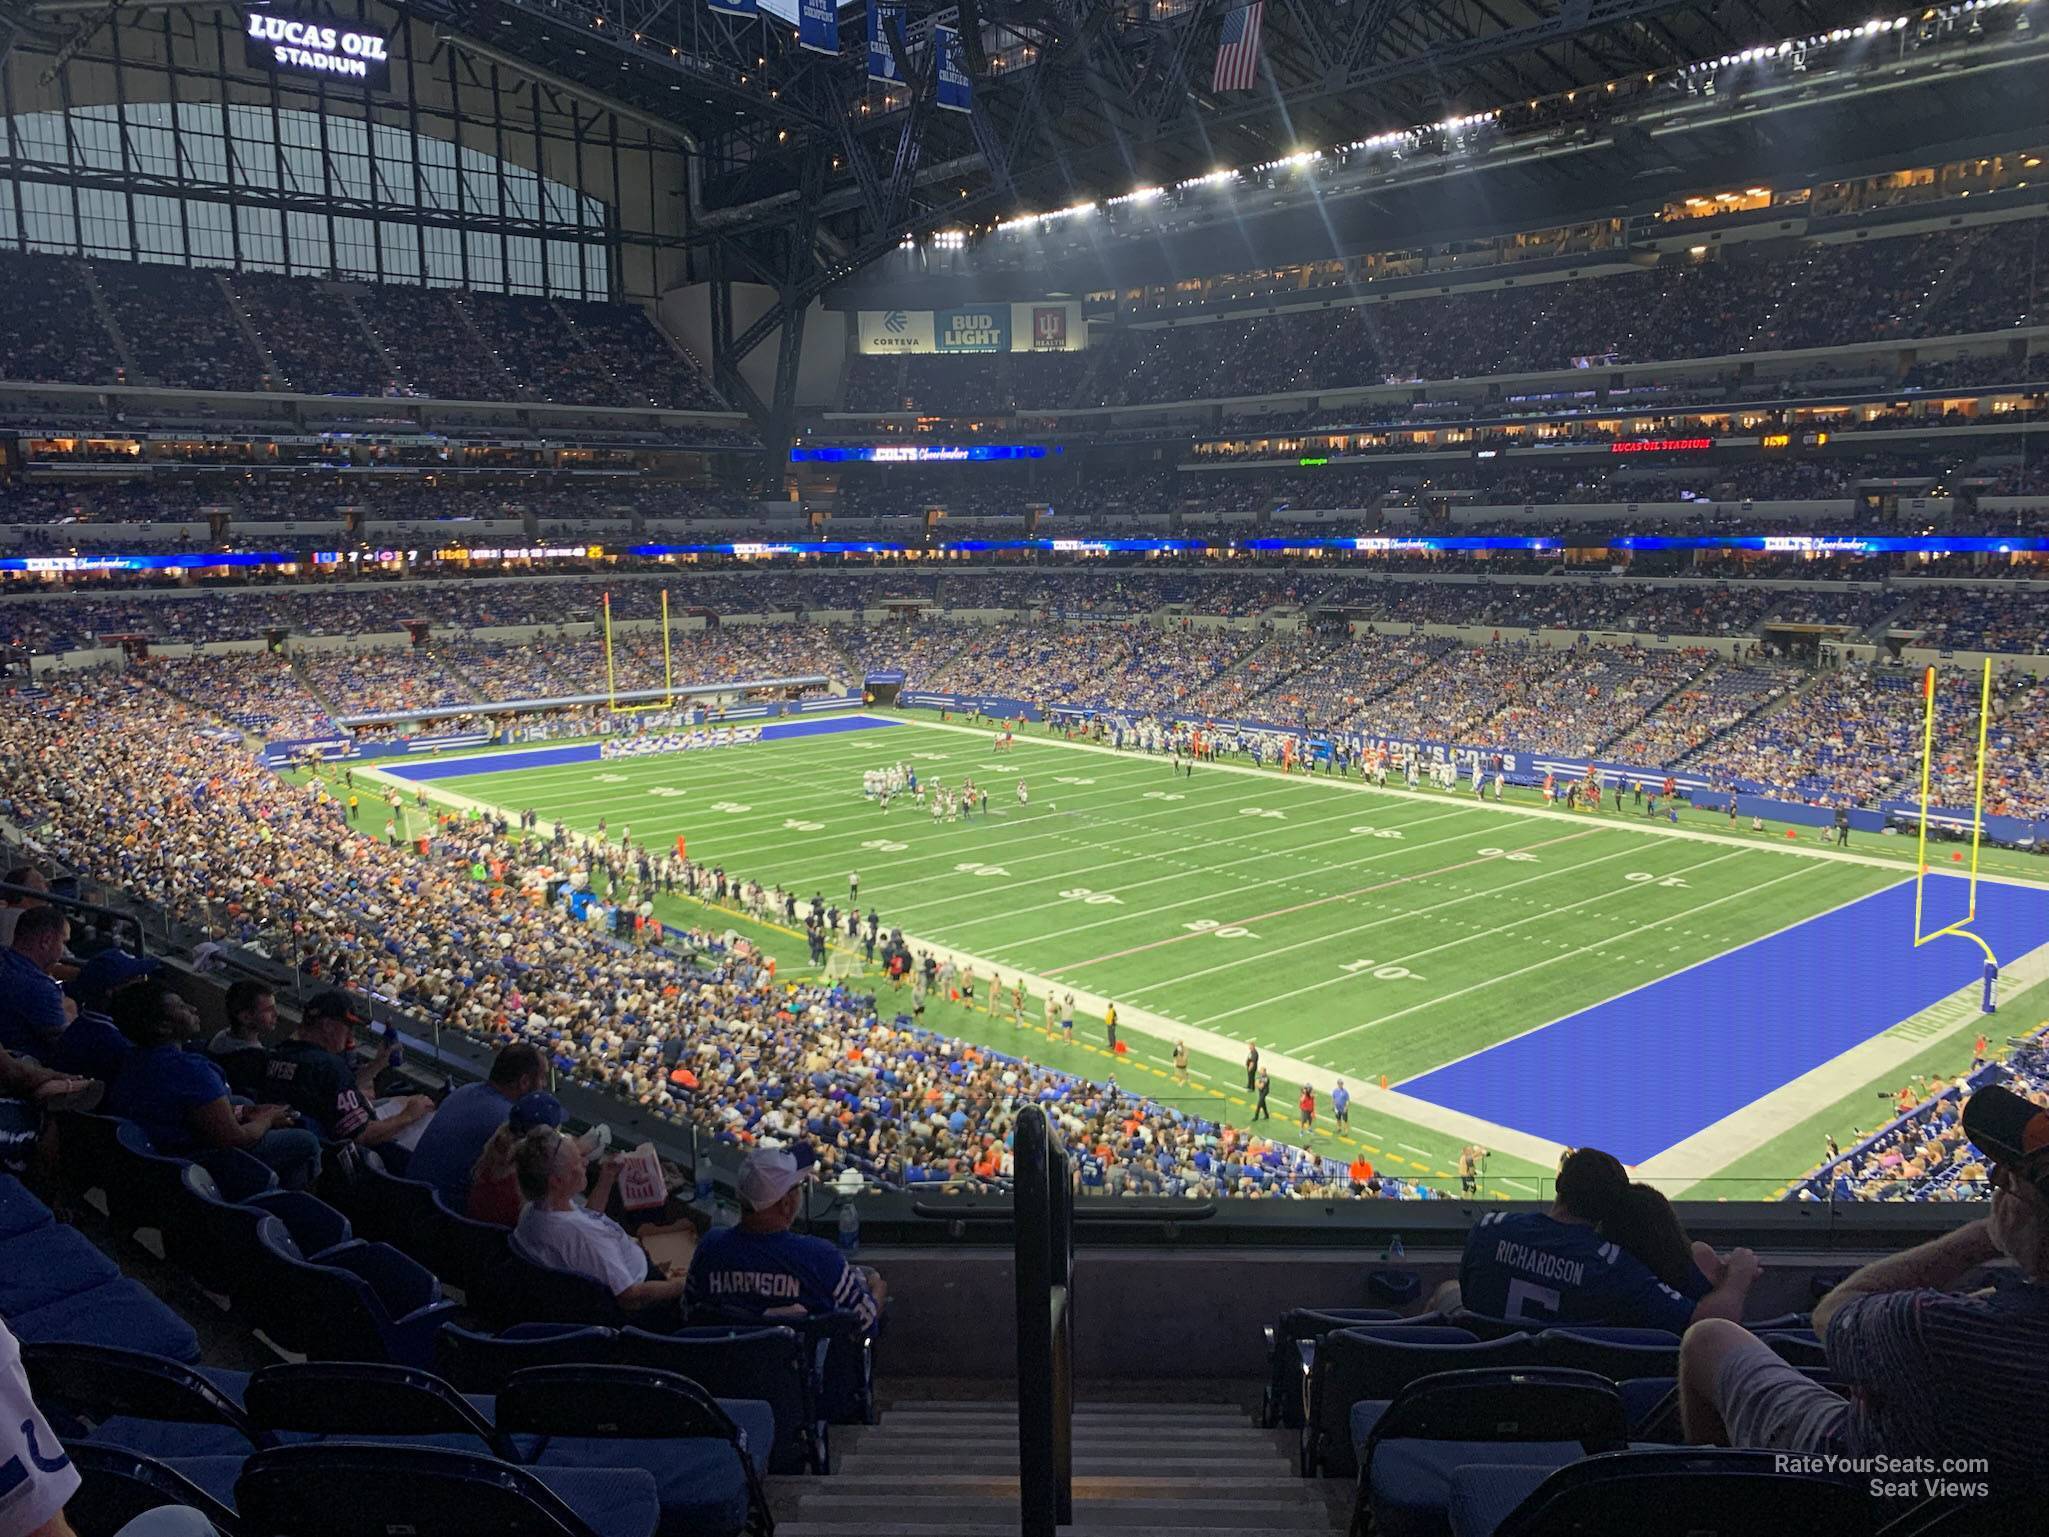 section 306, row 5n seat view  for football - lucas oil stadium